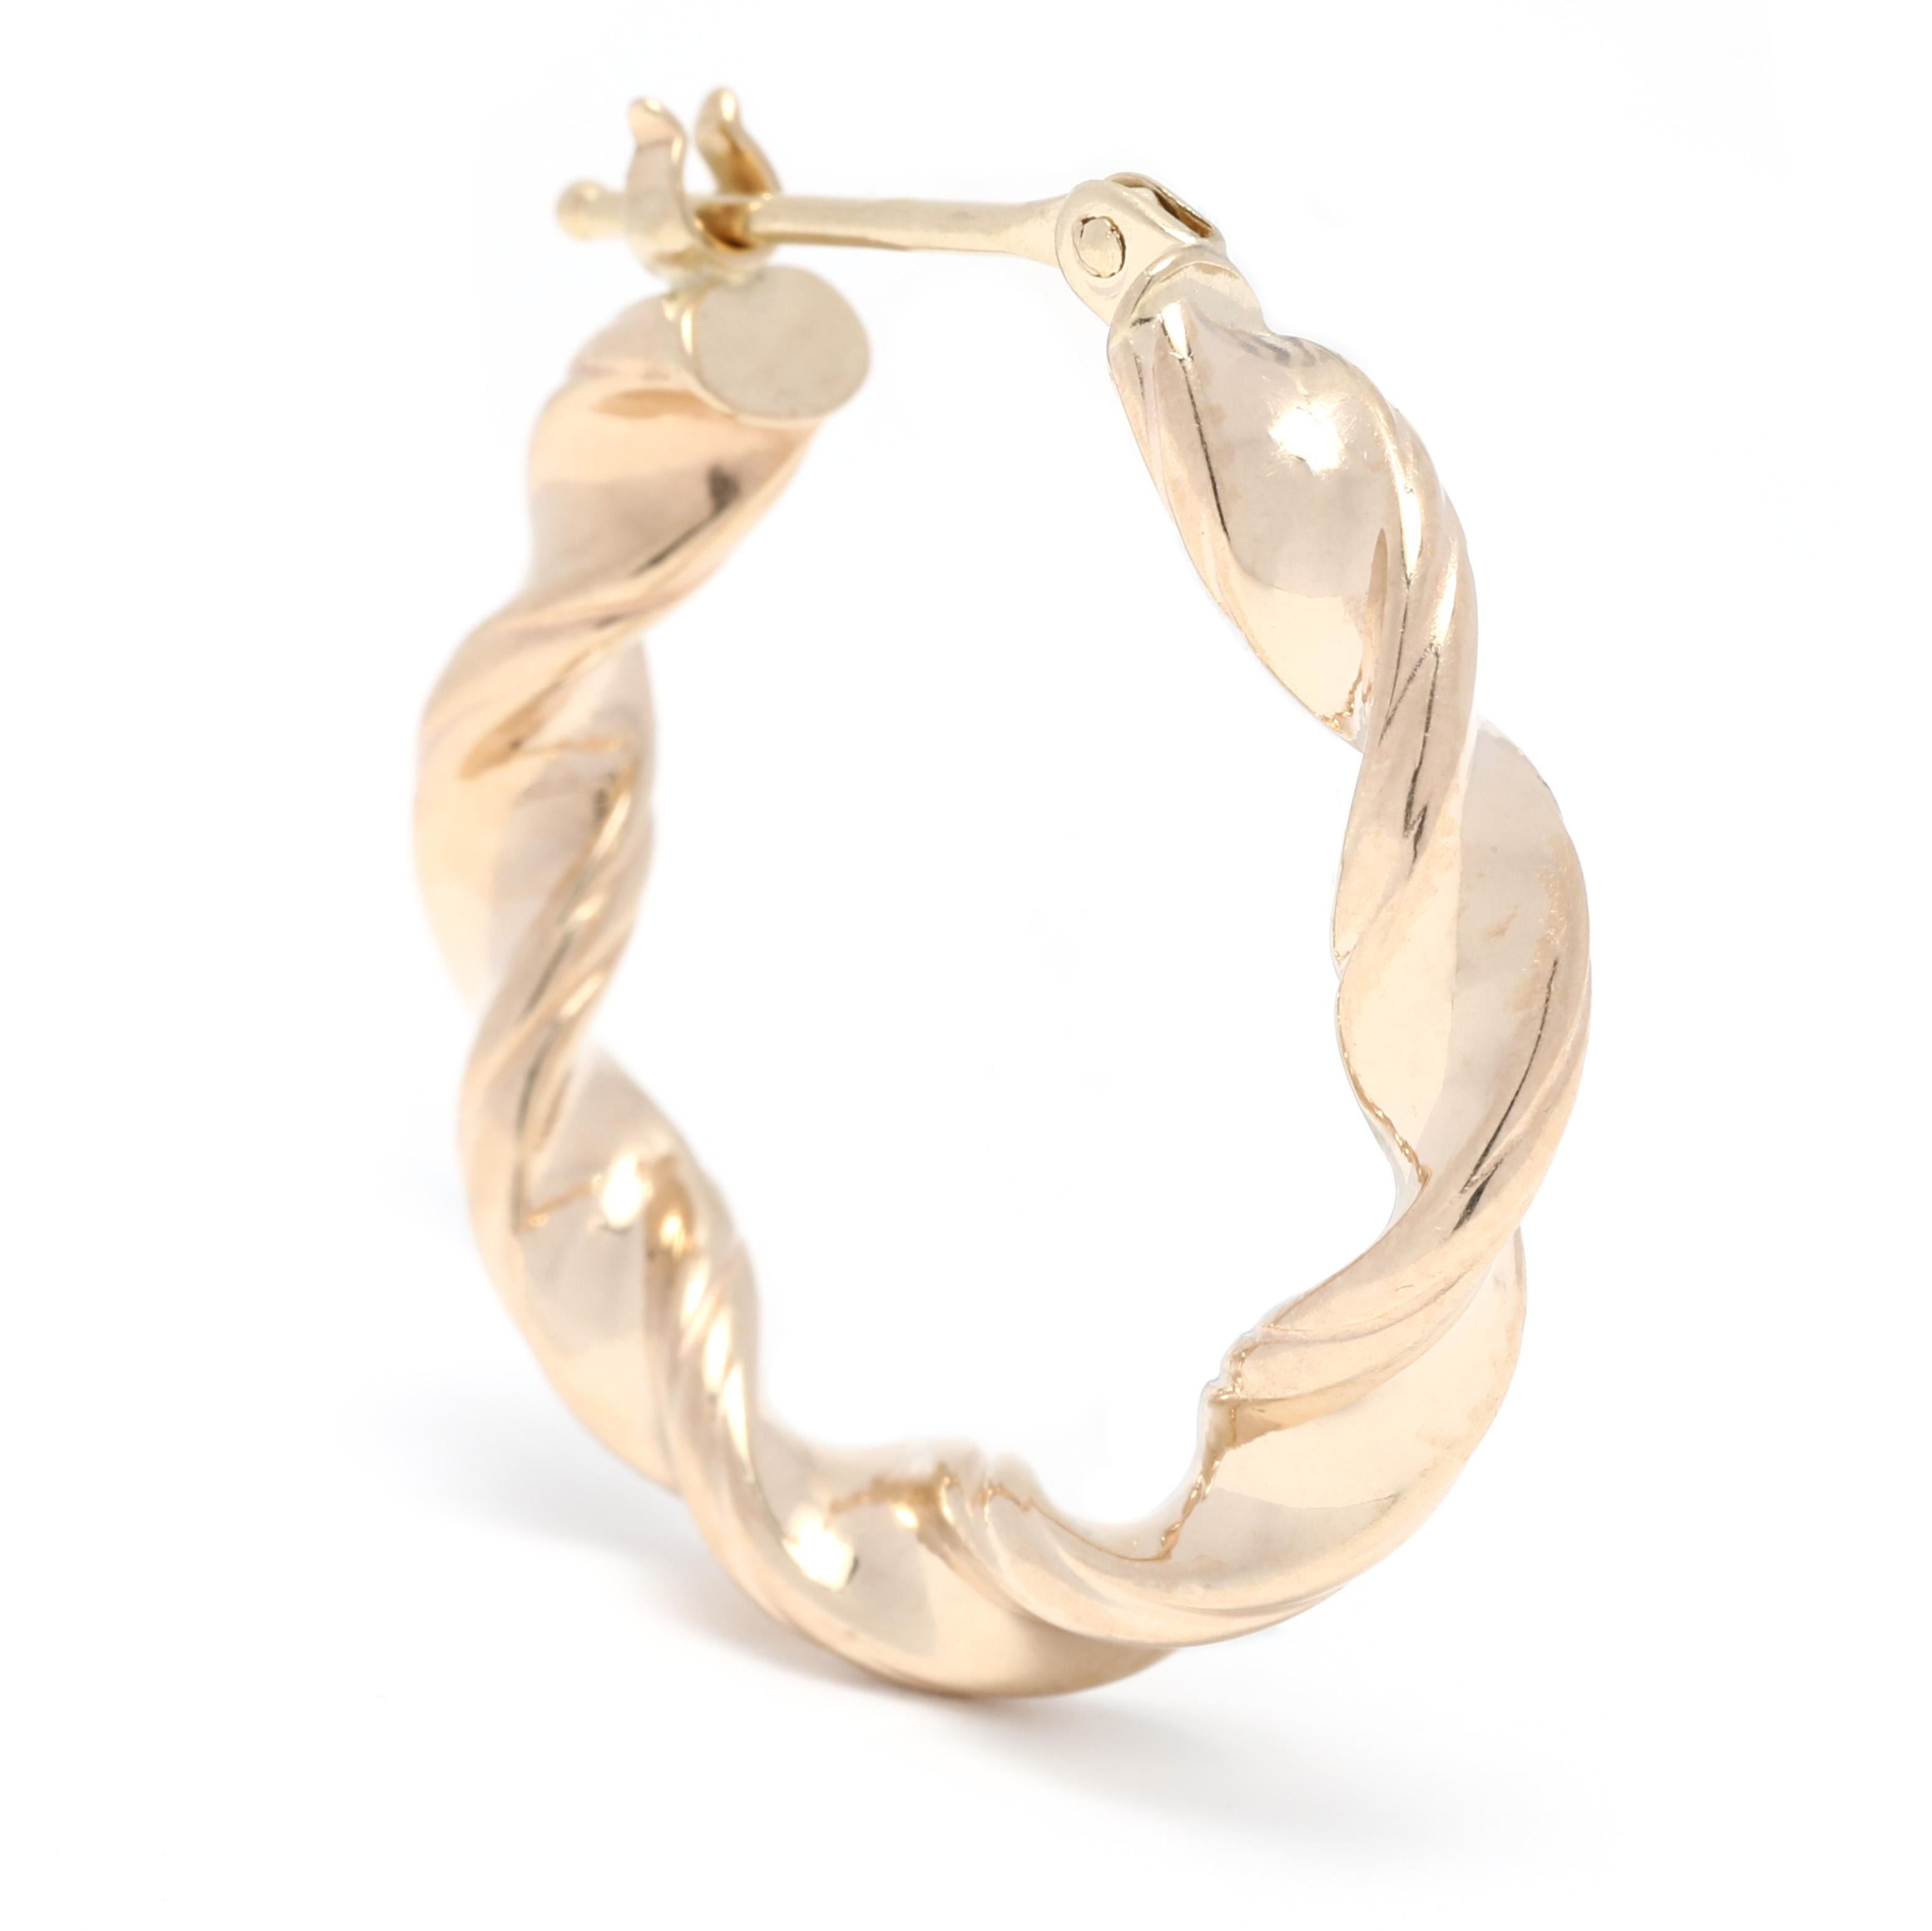 These small twist hoop earrings are the perfect accessory for any occasion. Crafted from 14K yellow gold, they boast a length of 7/8 inch, making them perfect for everyday wear. These small gold hoop earrings have a classic design, with a twisted